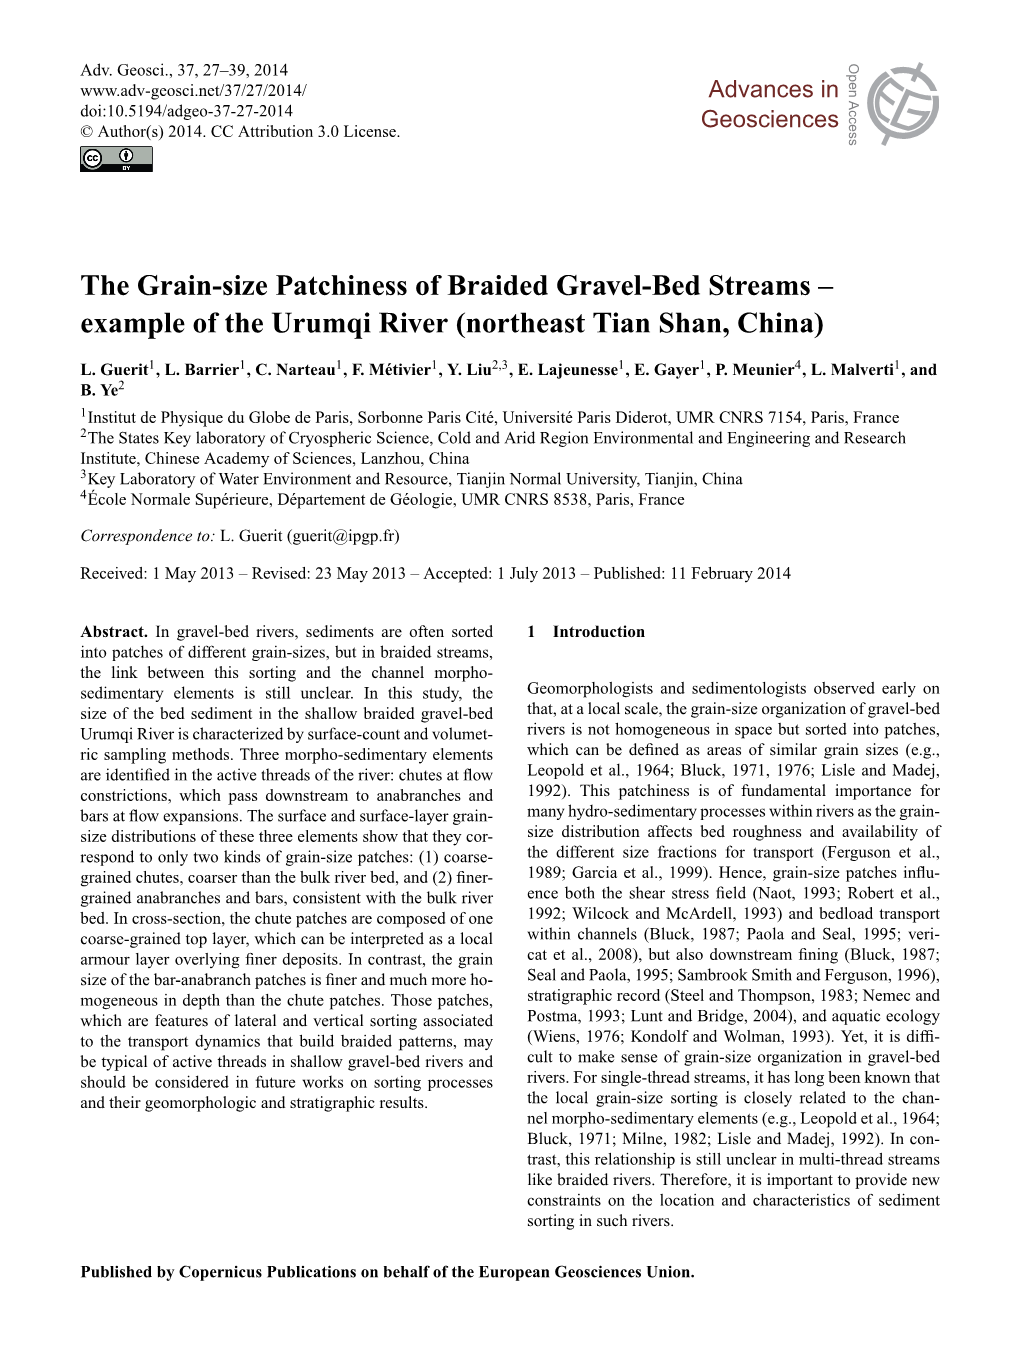 The Grain-Size Patchiness of Braided Gravel-Bed Streams – Example of the Urumqi River (Northeast Tian Shan, China)